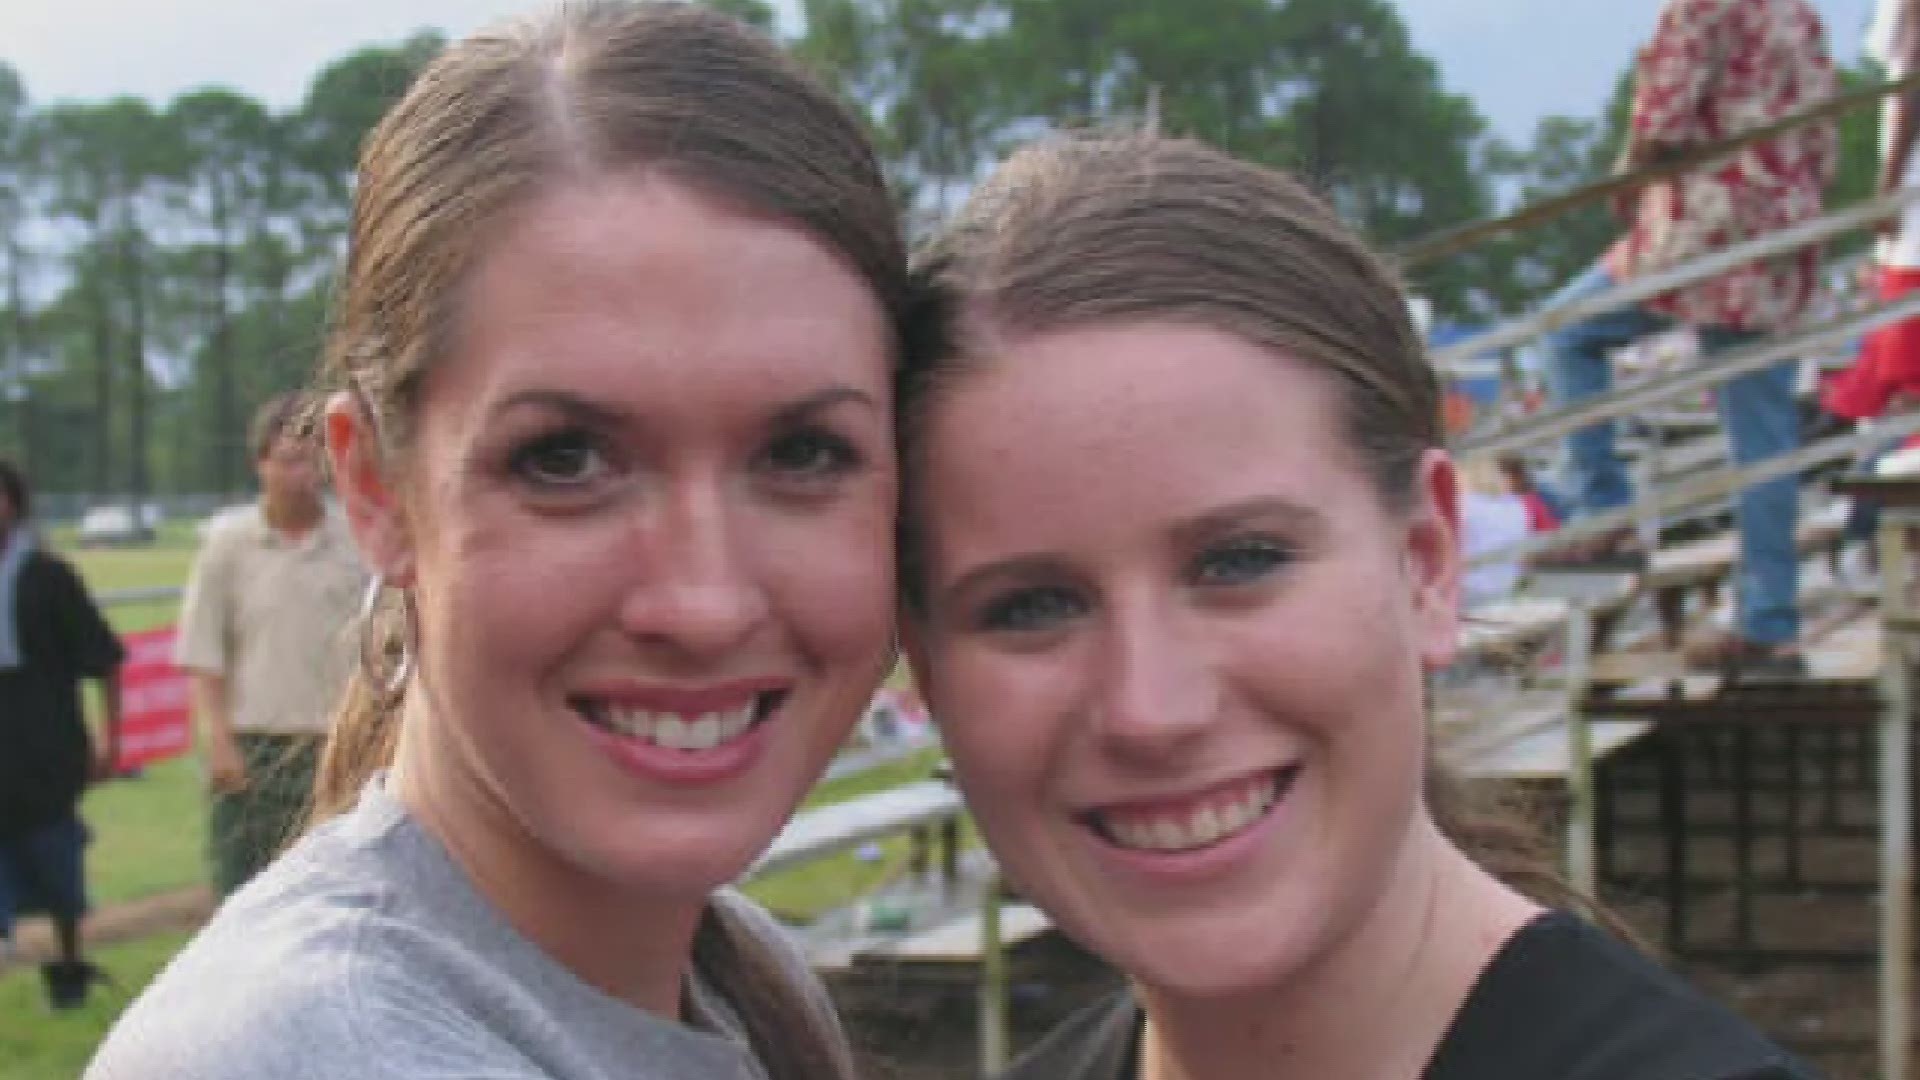 ARCHIVE: The Tara Grinstead Case, 10 years later